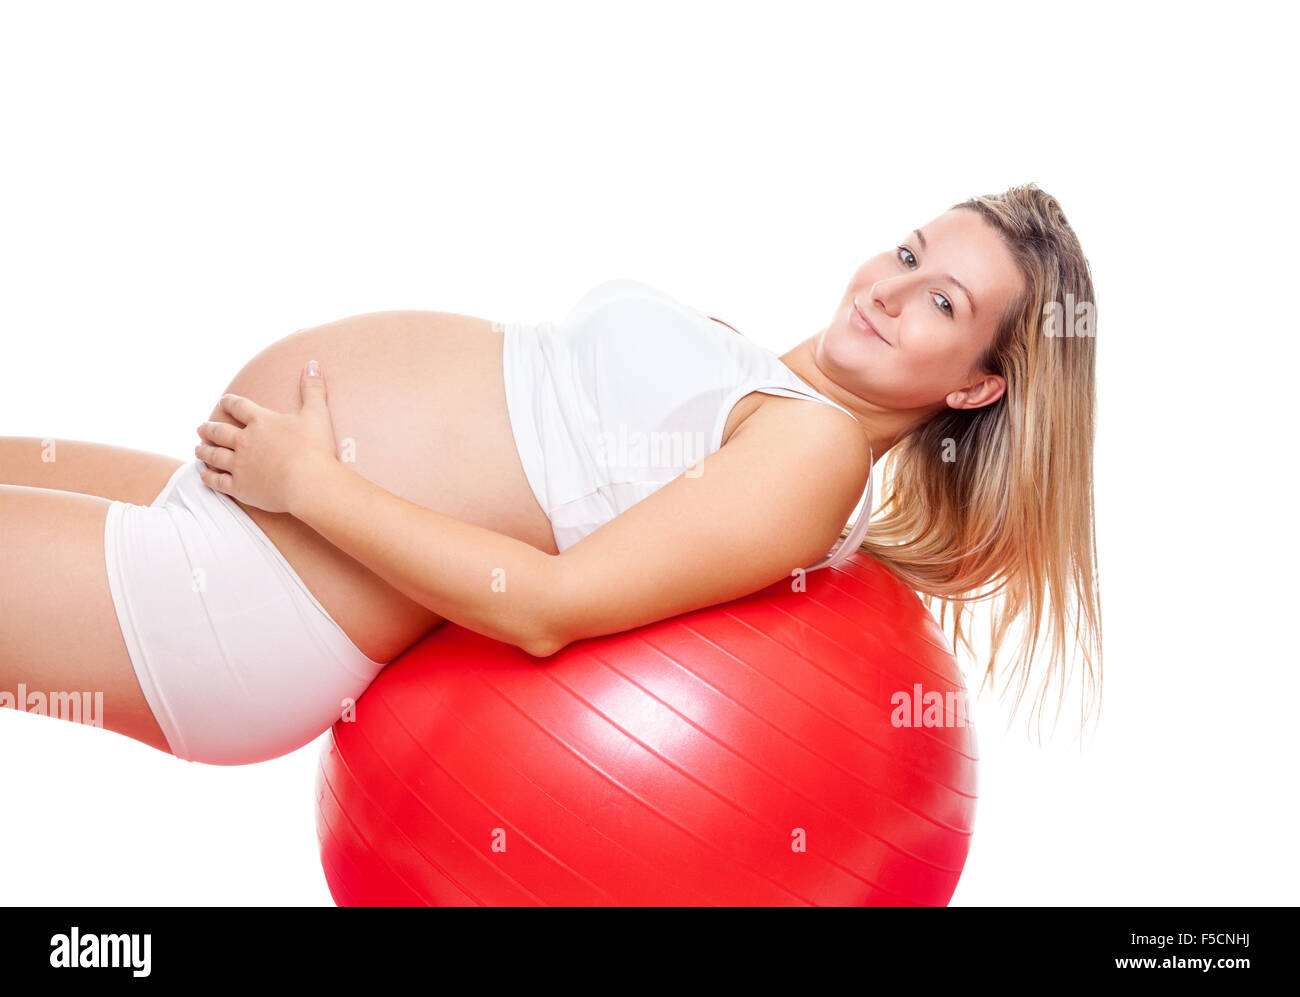 Working out with fitness ball during pregnancy Stock Photo